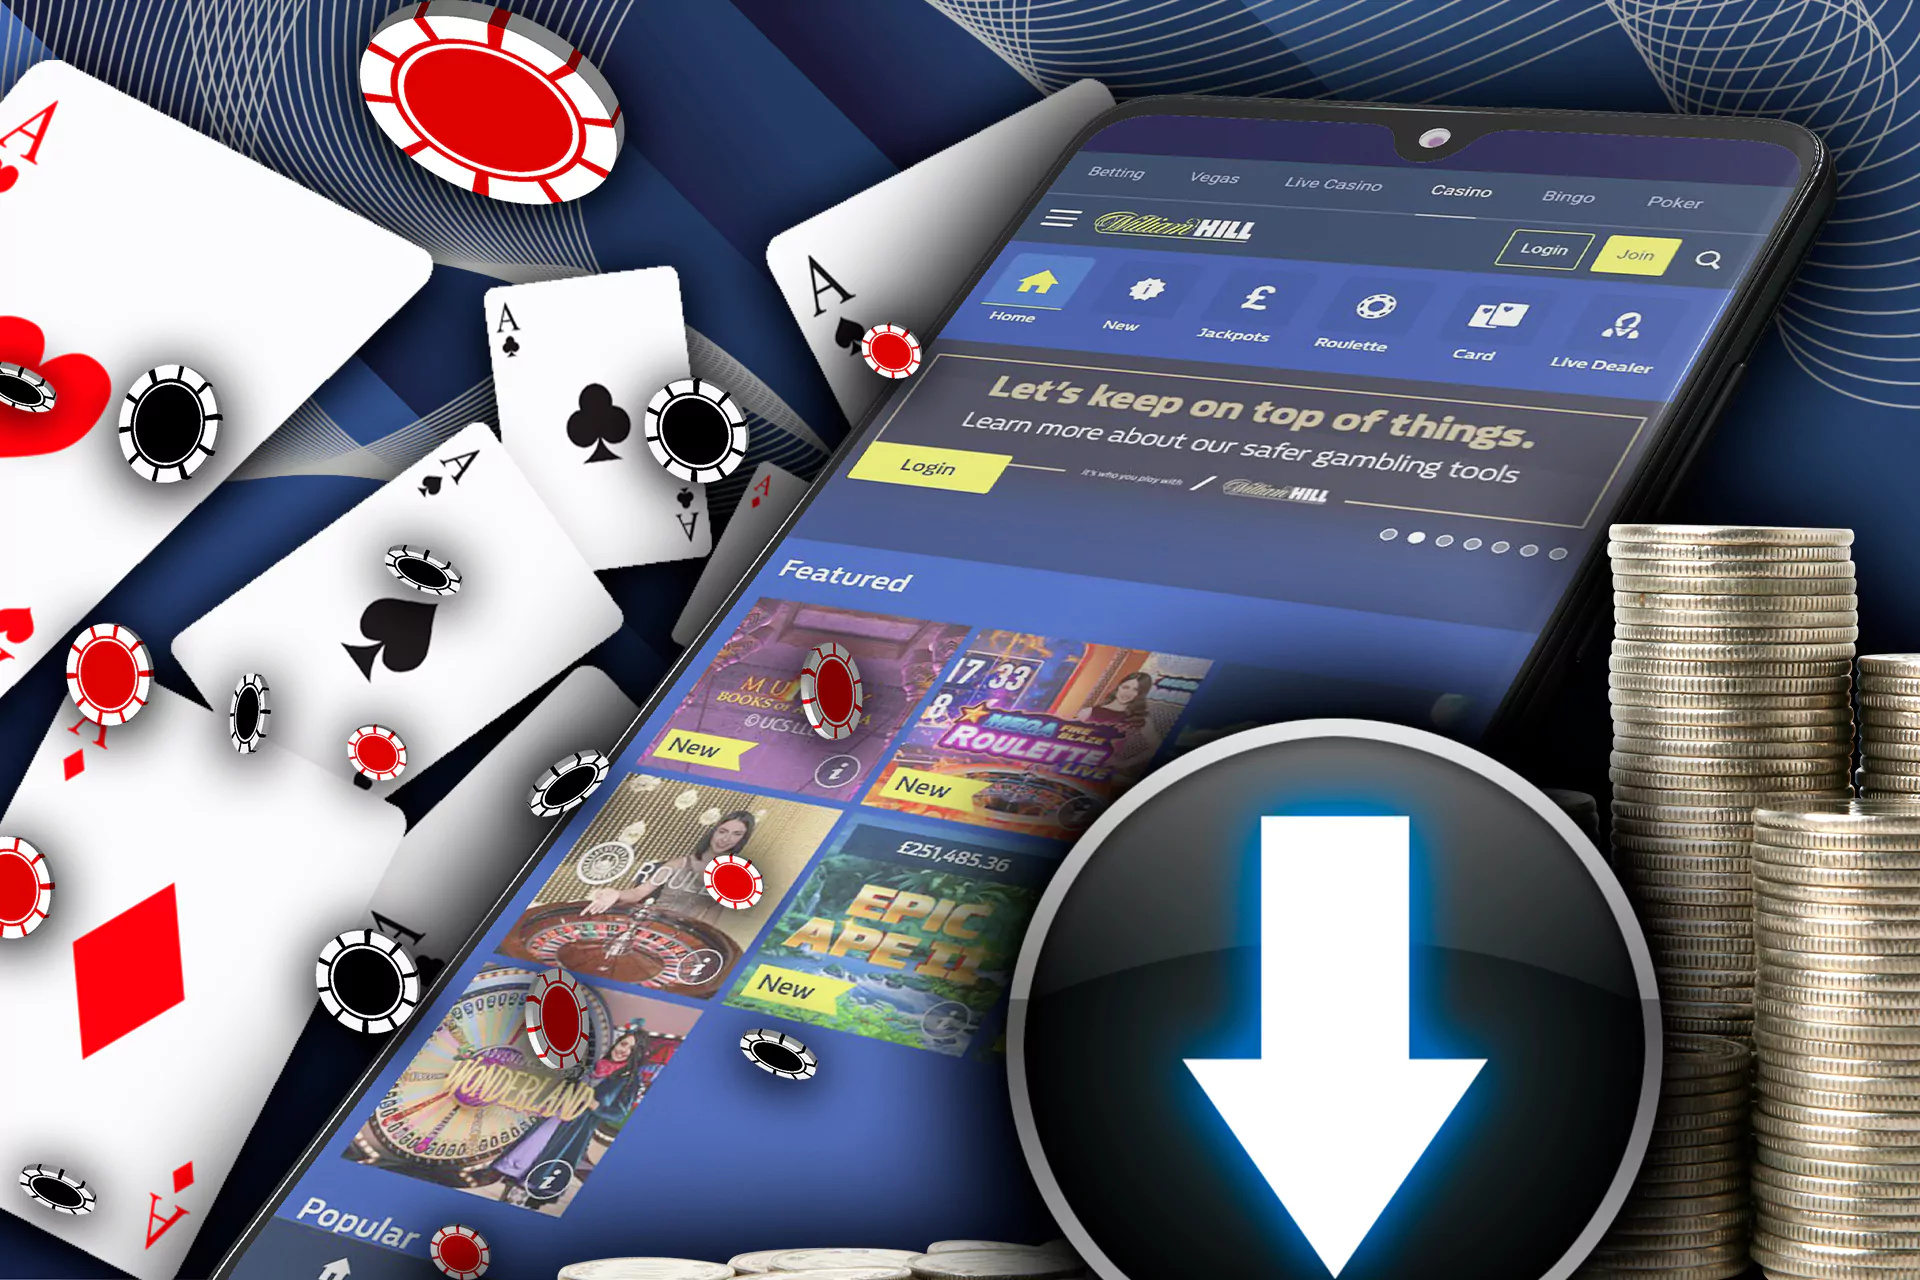 You can play games in the casino section of the app.